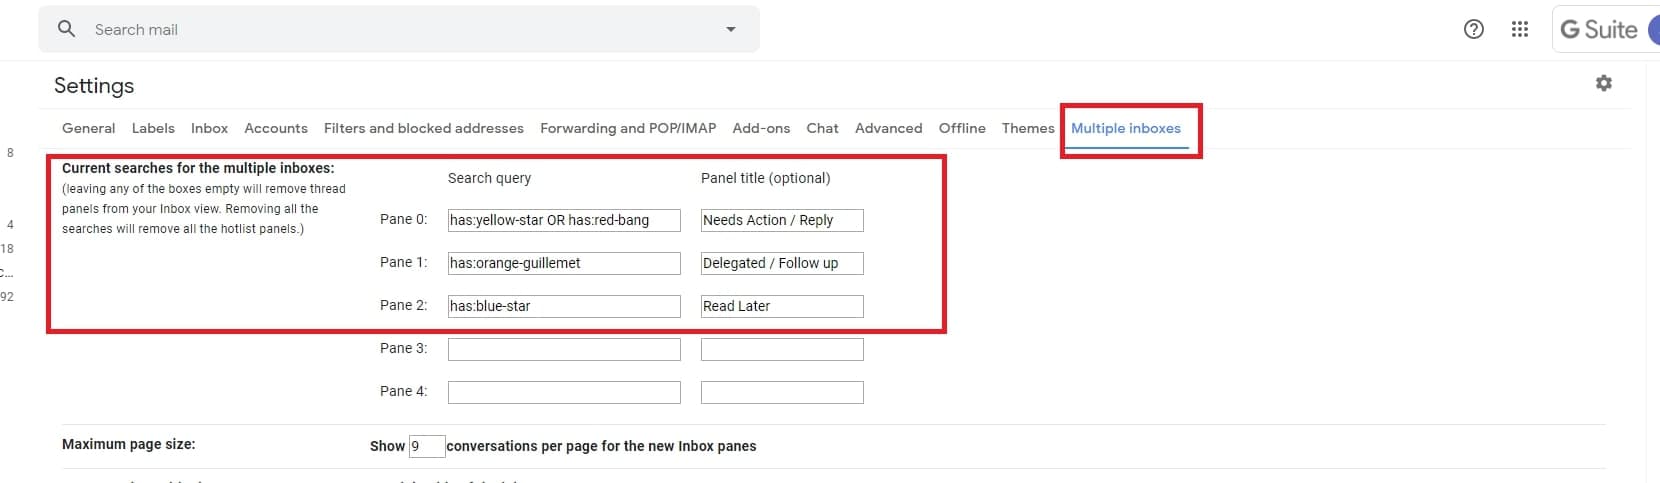 Organize multiple inboxes with actions - lean email management